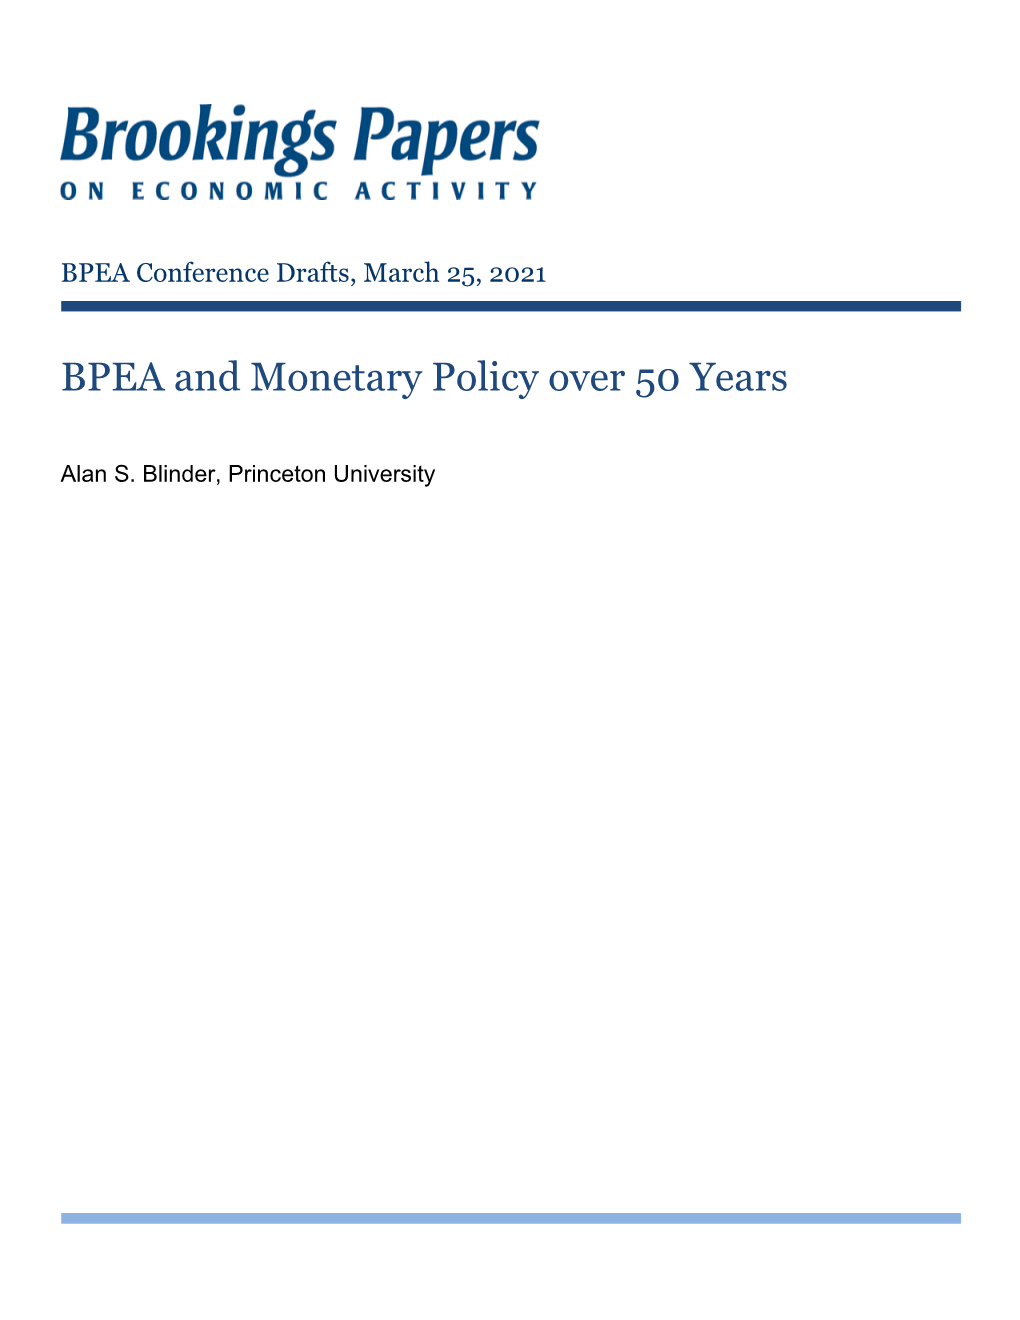 BPEA and Monetary Policy Over 50 Years